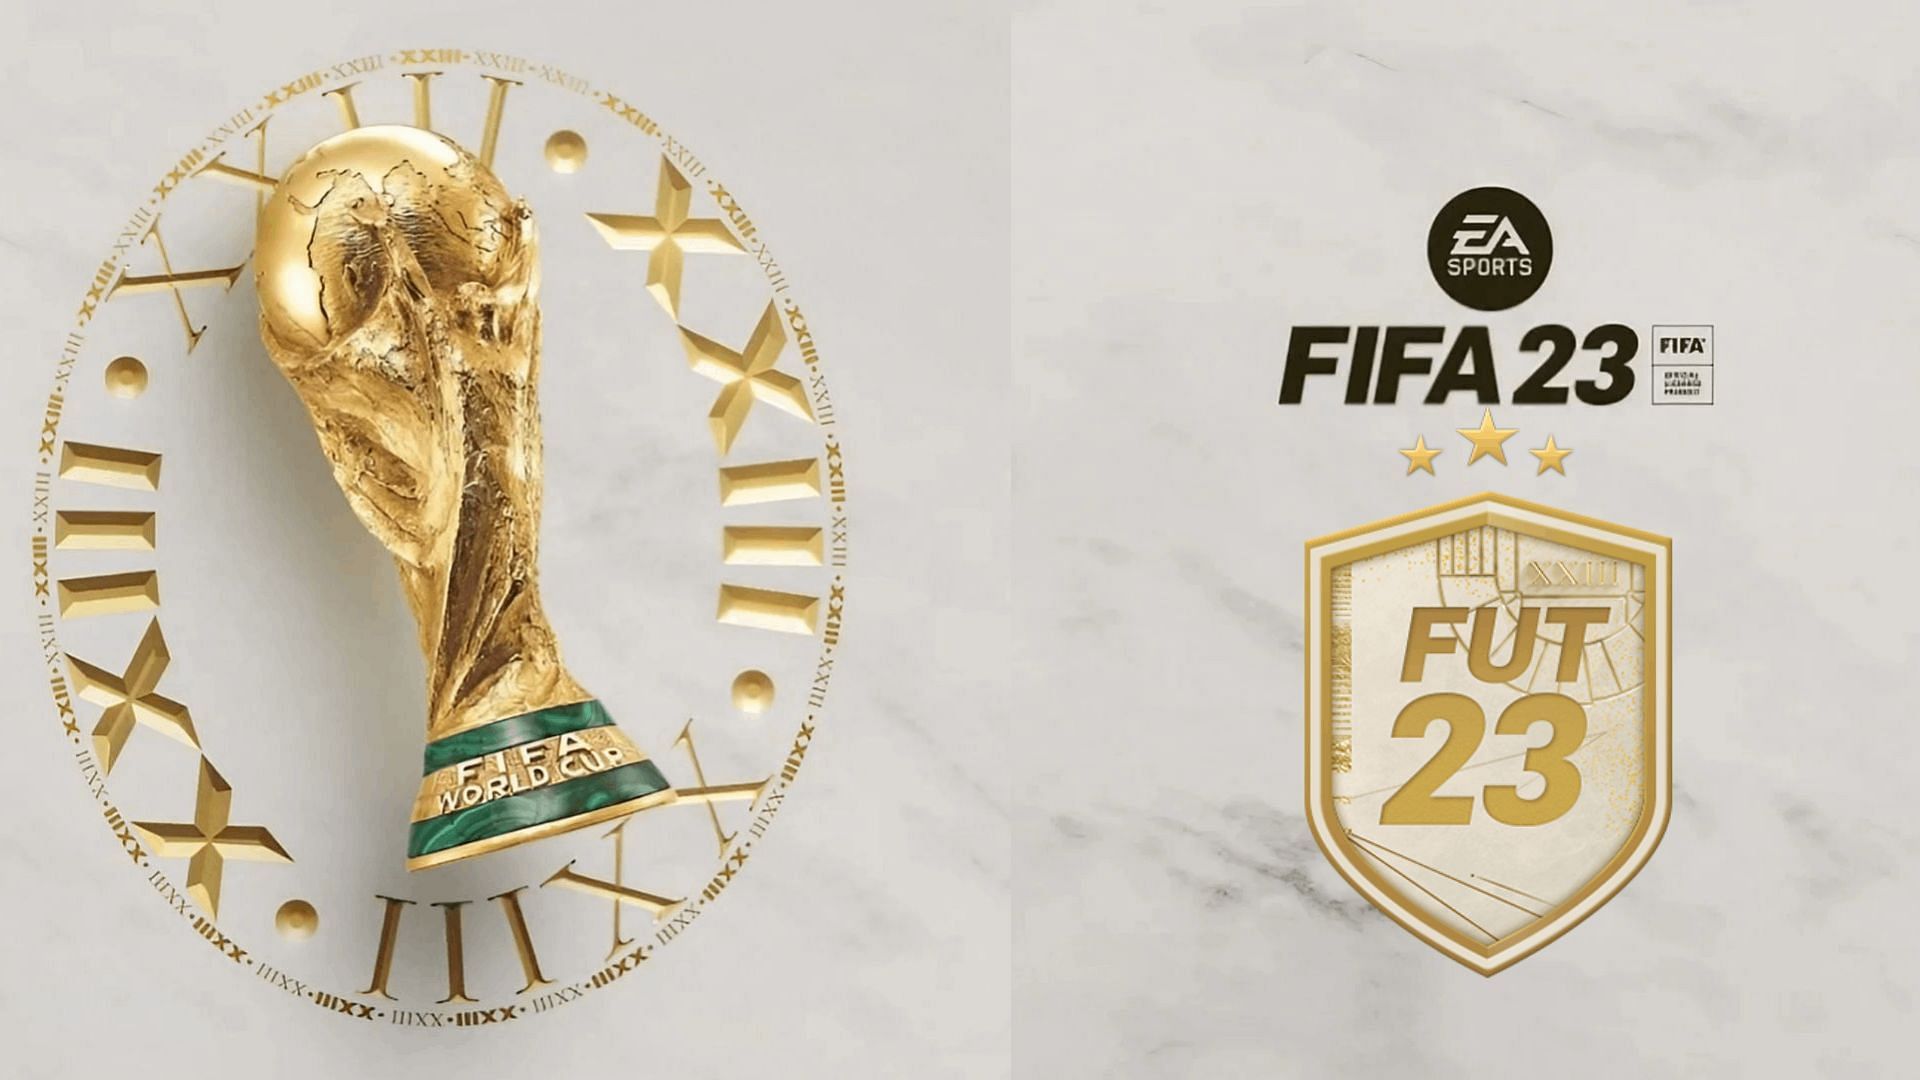 FIFA 23 World Cup Warm Up Challenge 3 SBC How to complete, estimated costs, and more